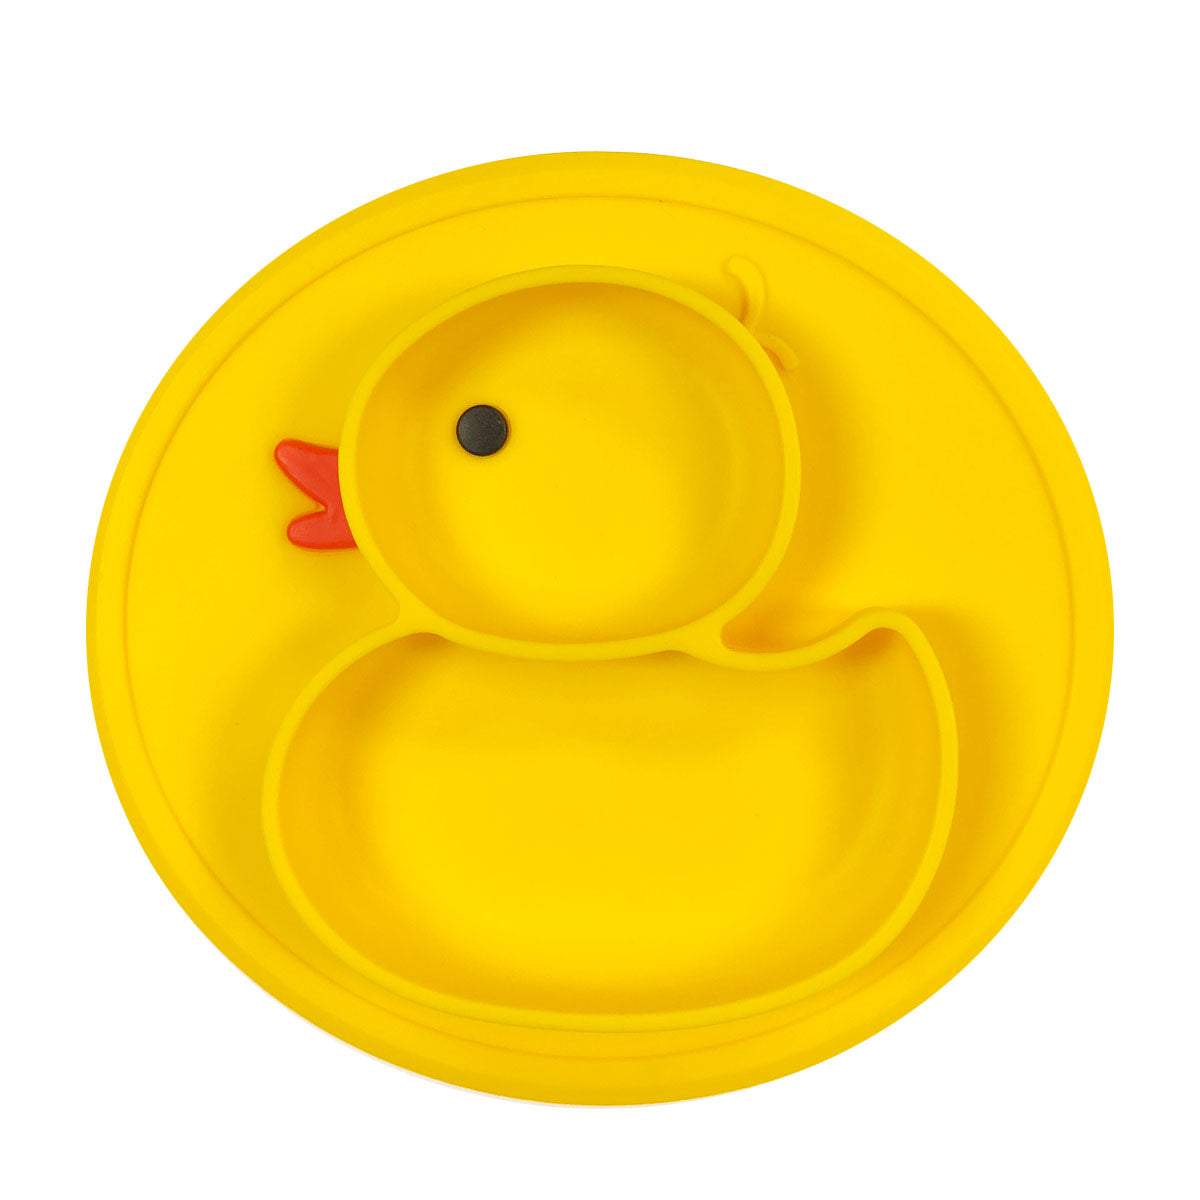 Wrapables® Silicone Placemat + Suction Food Plate for Baby, Duck